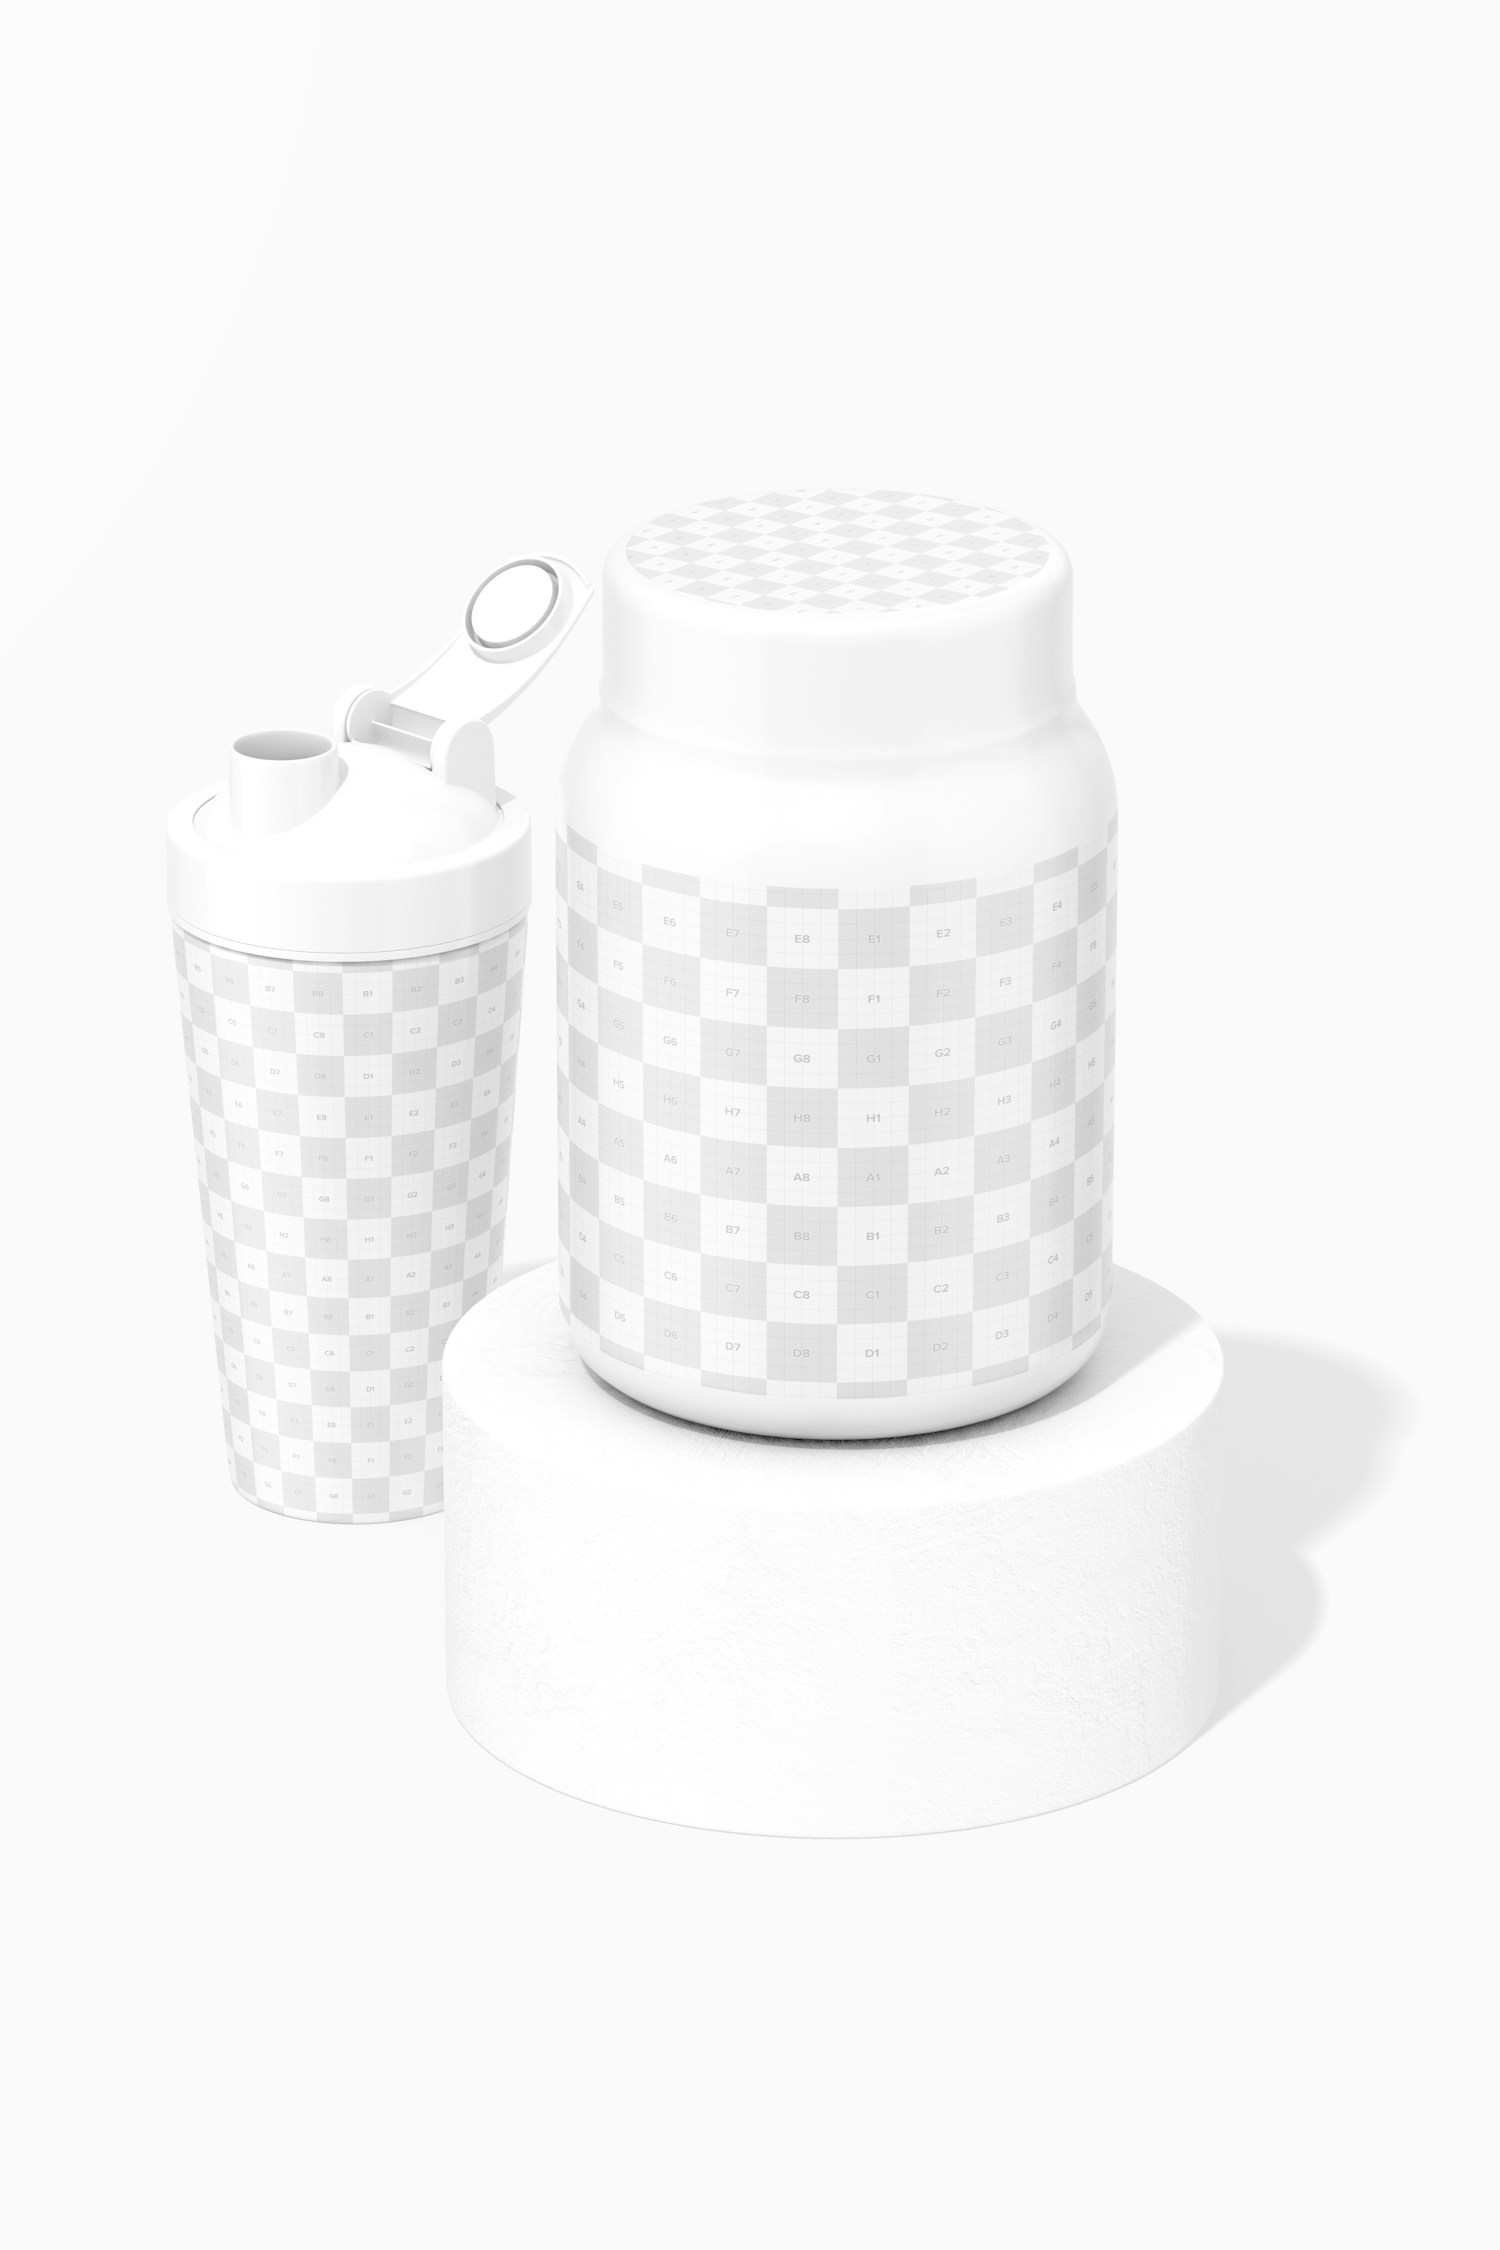 20 gr Protein Powder Container Mockup, Perspective